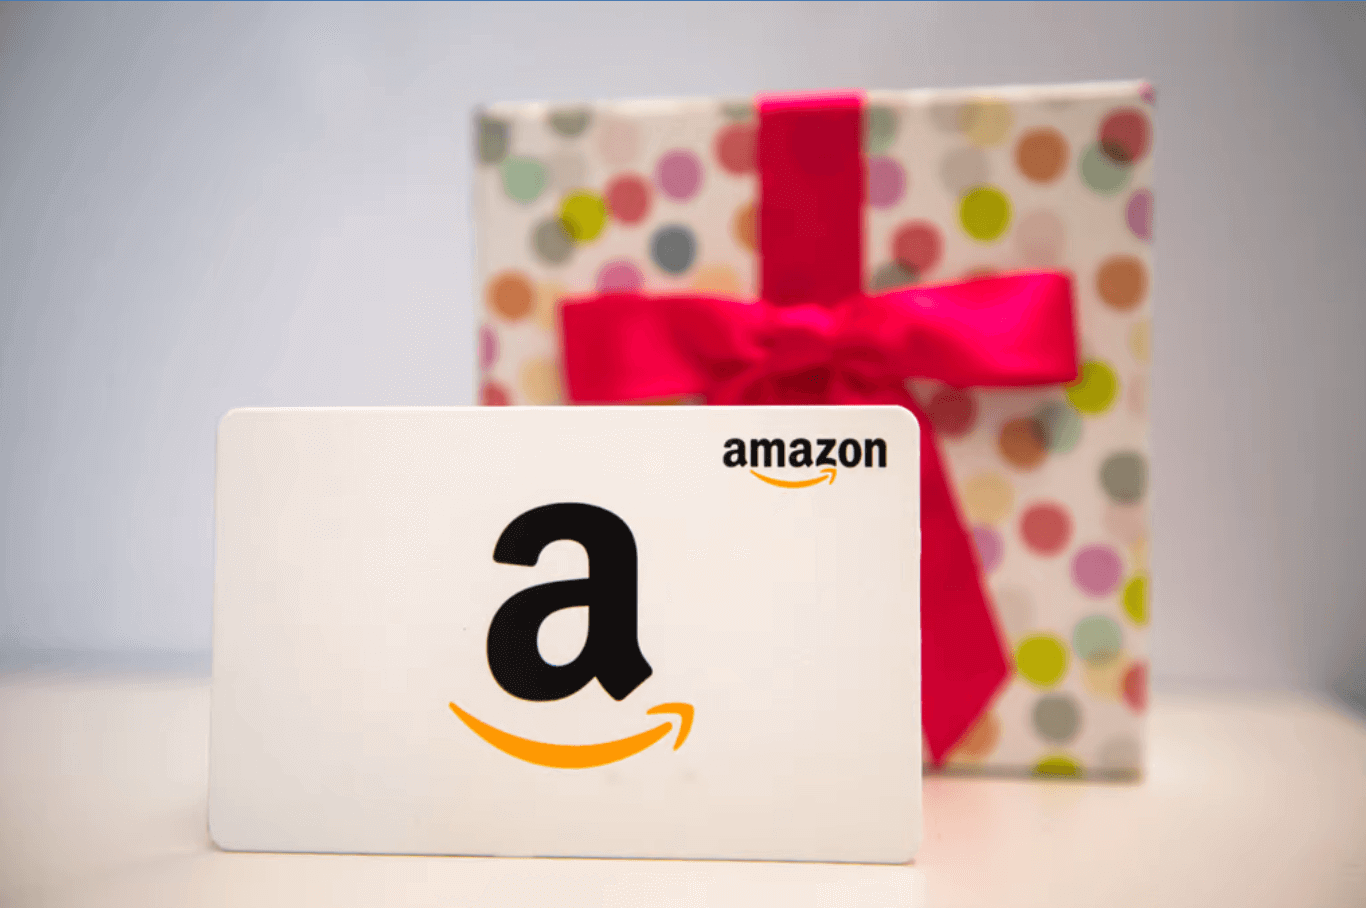 Amazon%20Gift%20cards-c4b9f66a